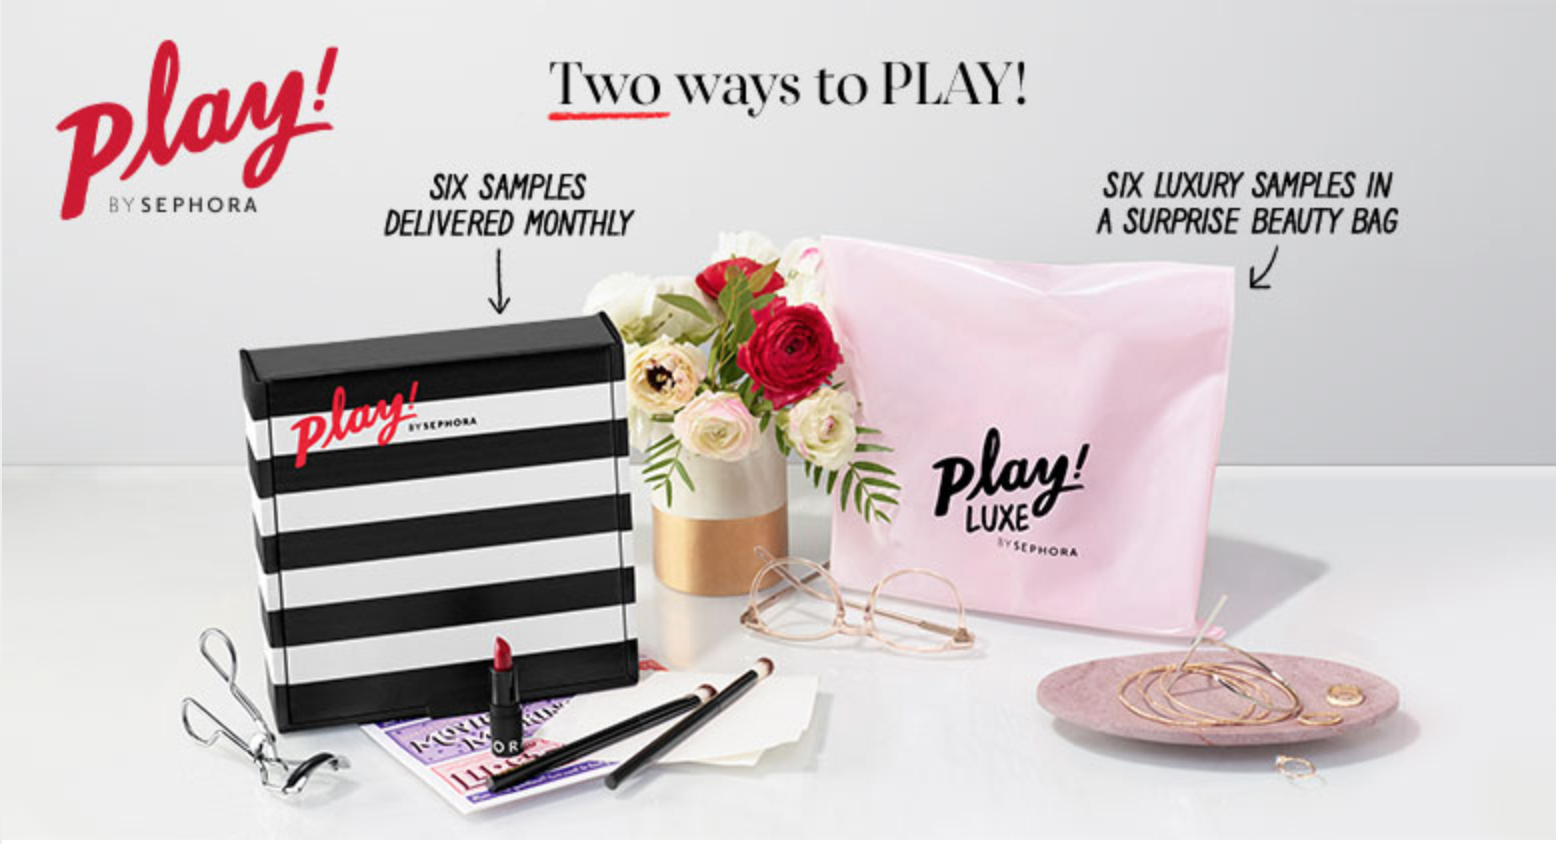 Sephora Sale – Past Play! By Sephora Boxes Available Now!